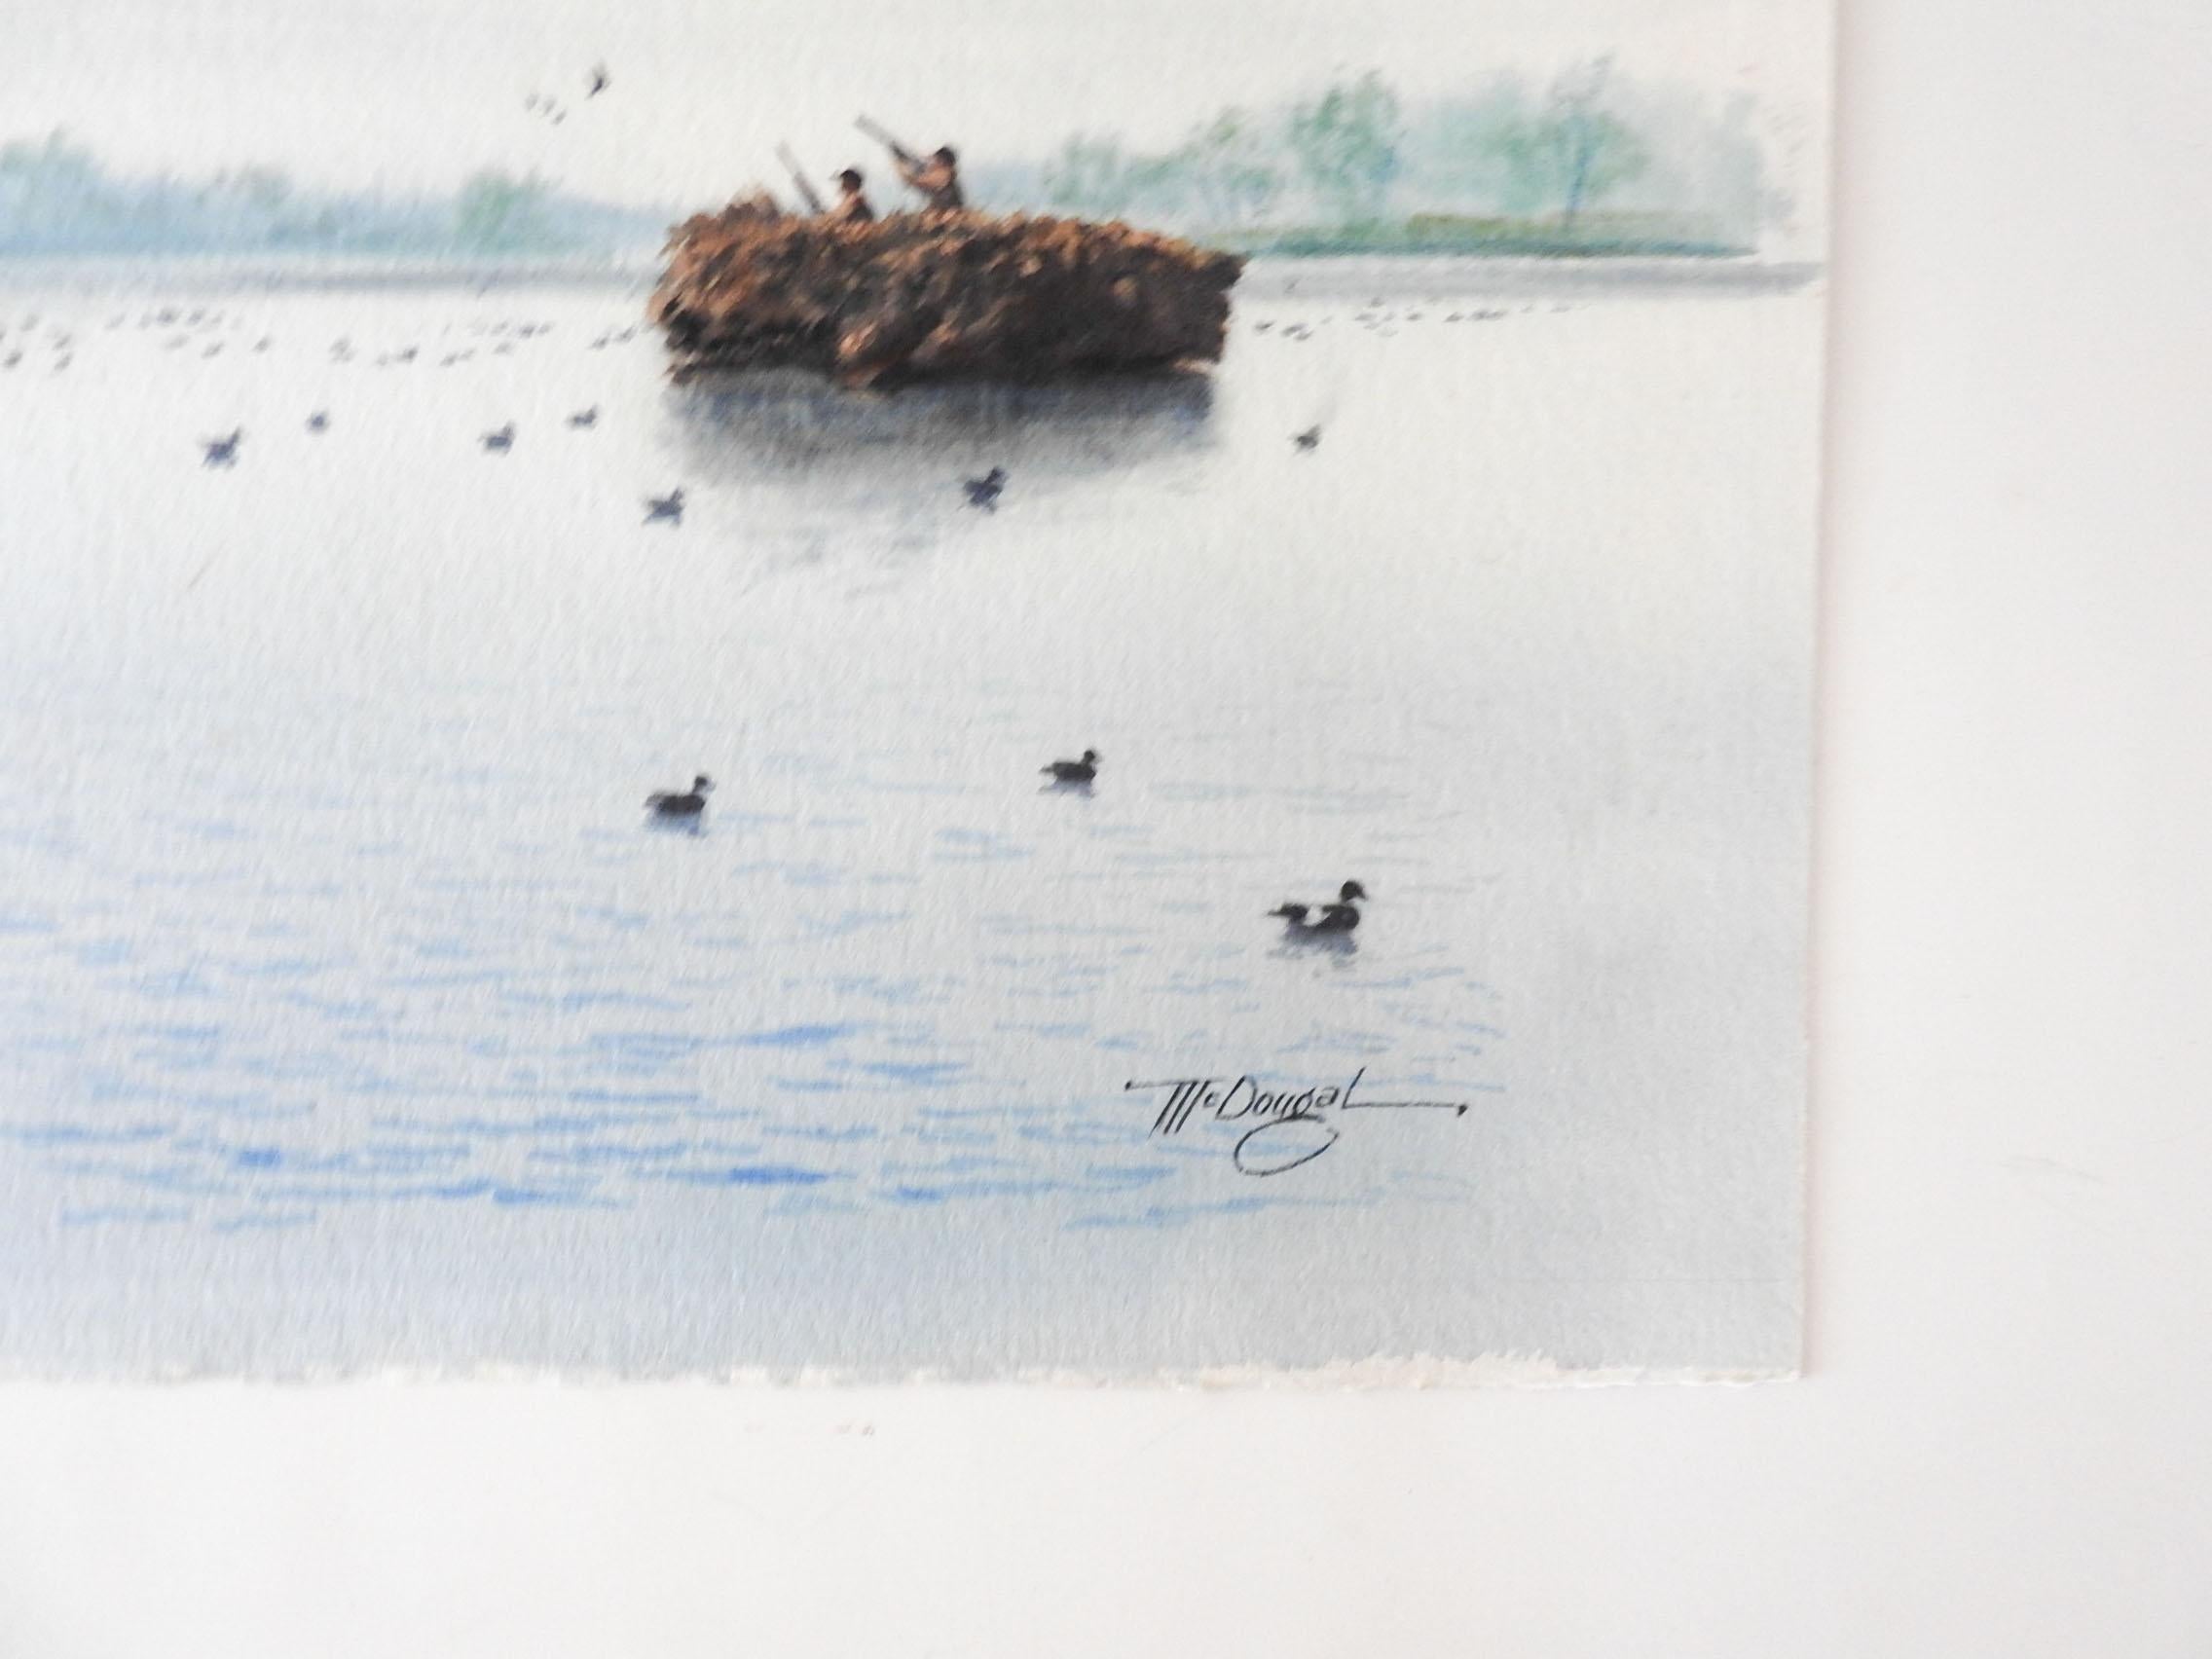 Vintage mid-20th century watercolor on paper of duck hunters by Ivan Ellis McDoughall (b. 1927) Texas. Signed lower right corner, another painting on verso. Unframed, tape remains on verso.